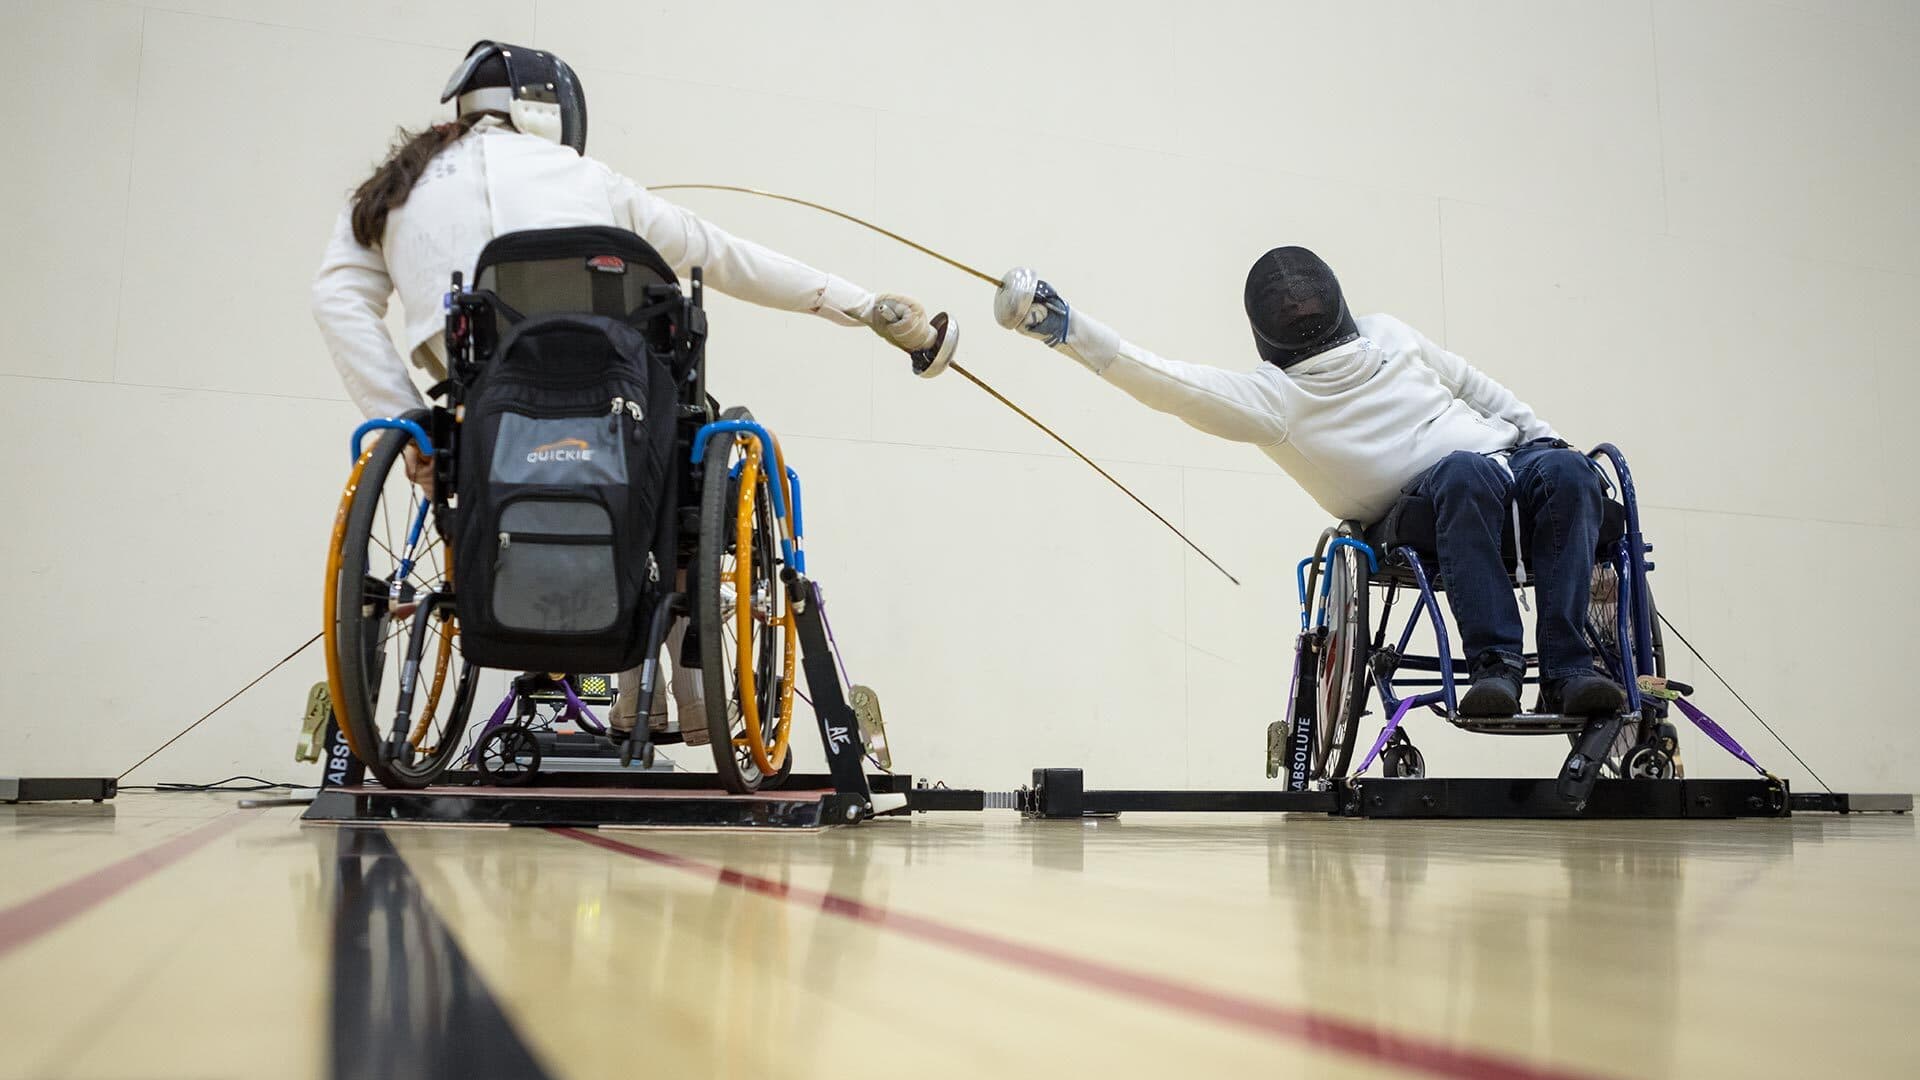 Two fencers in wheelchairs use accessible fencing frame